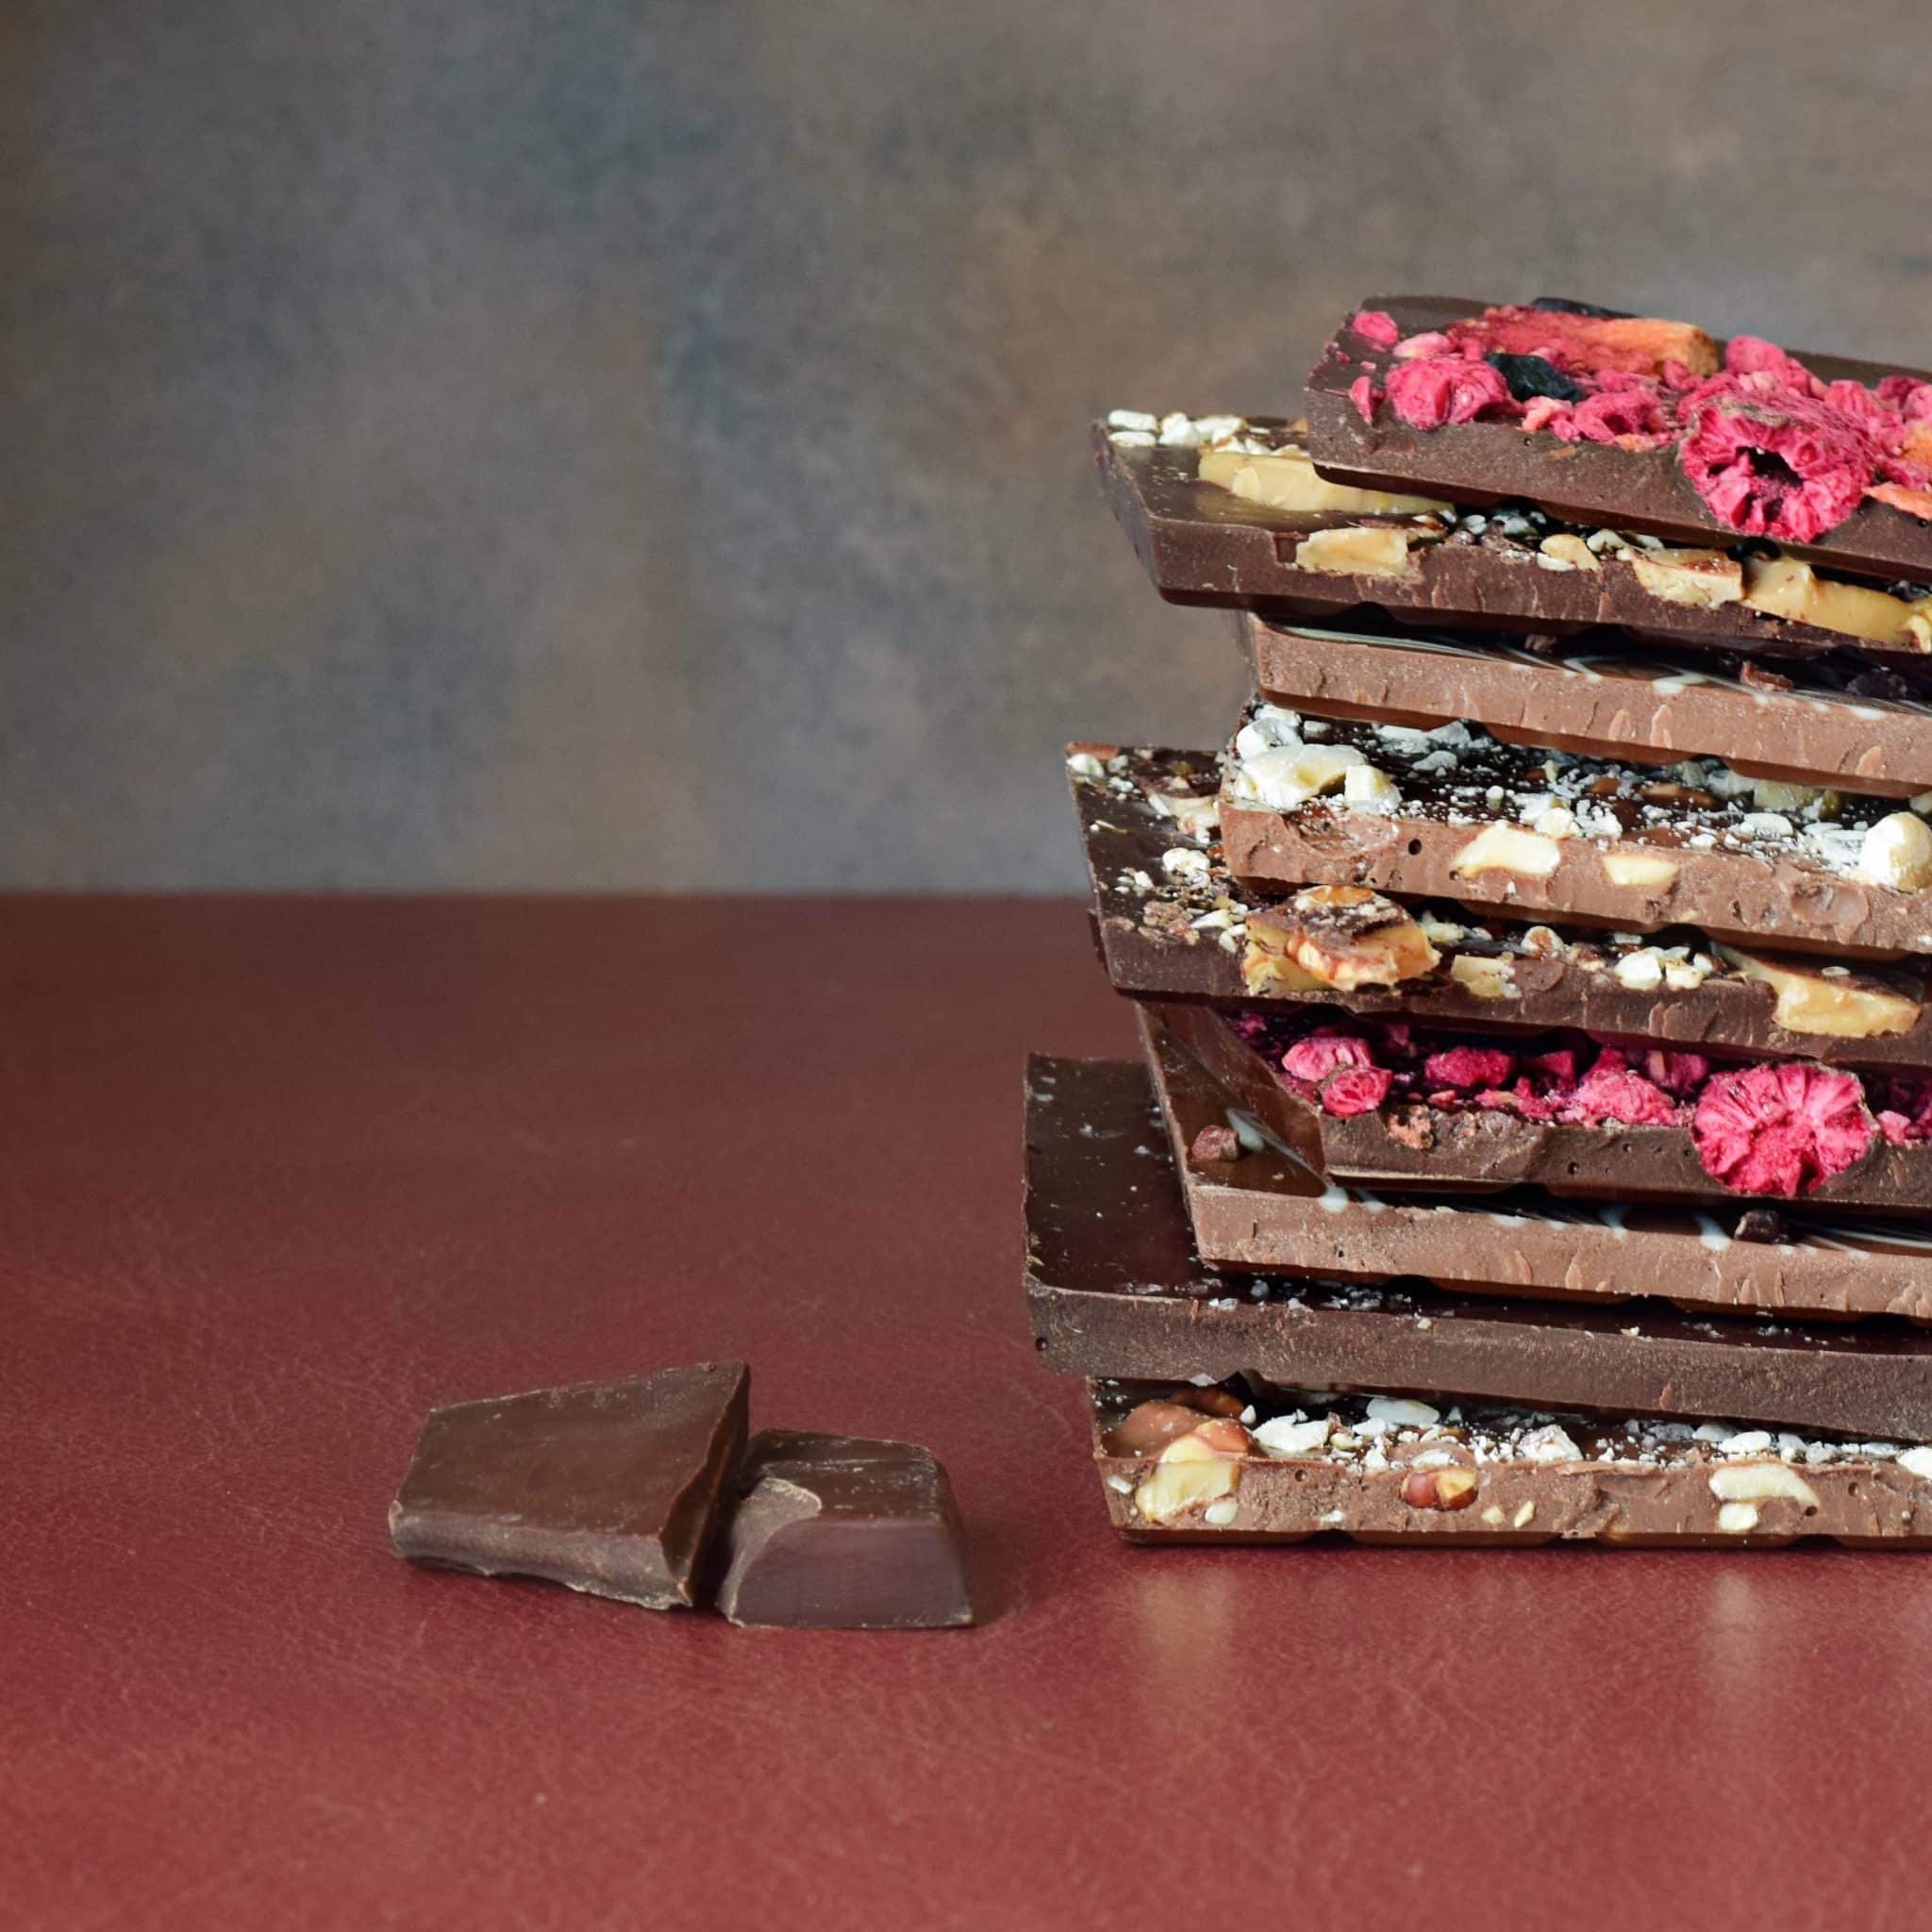 Stack of artisanal chocolate bars in dark, milk, and white chocolates with inclusions in each one.